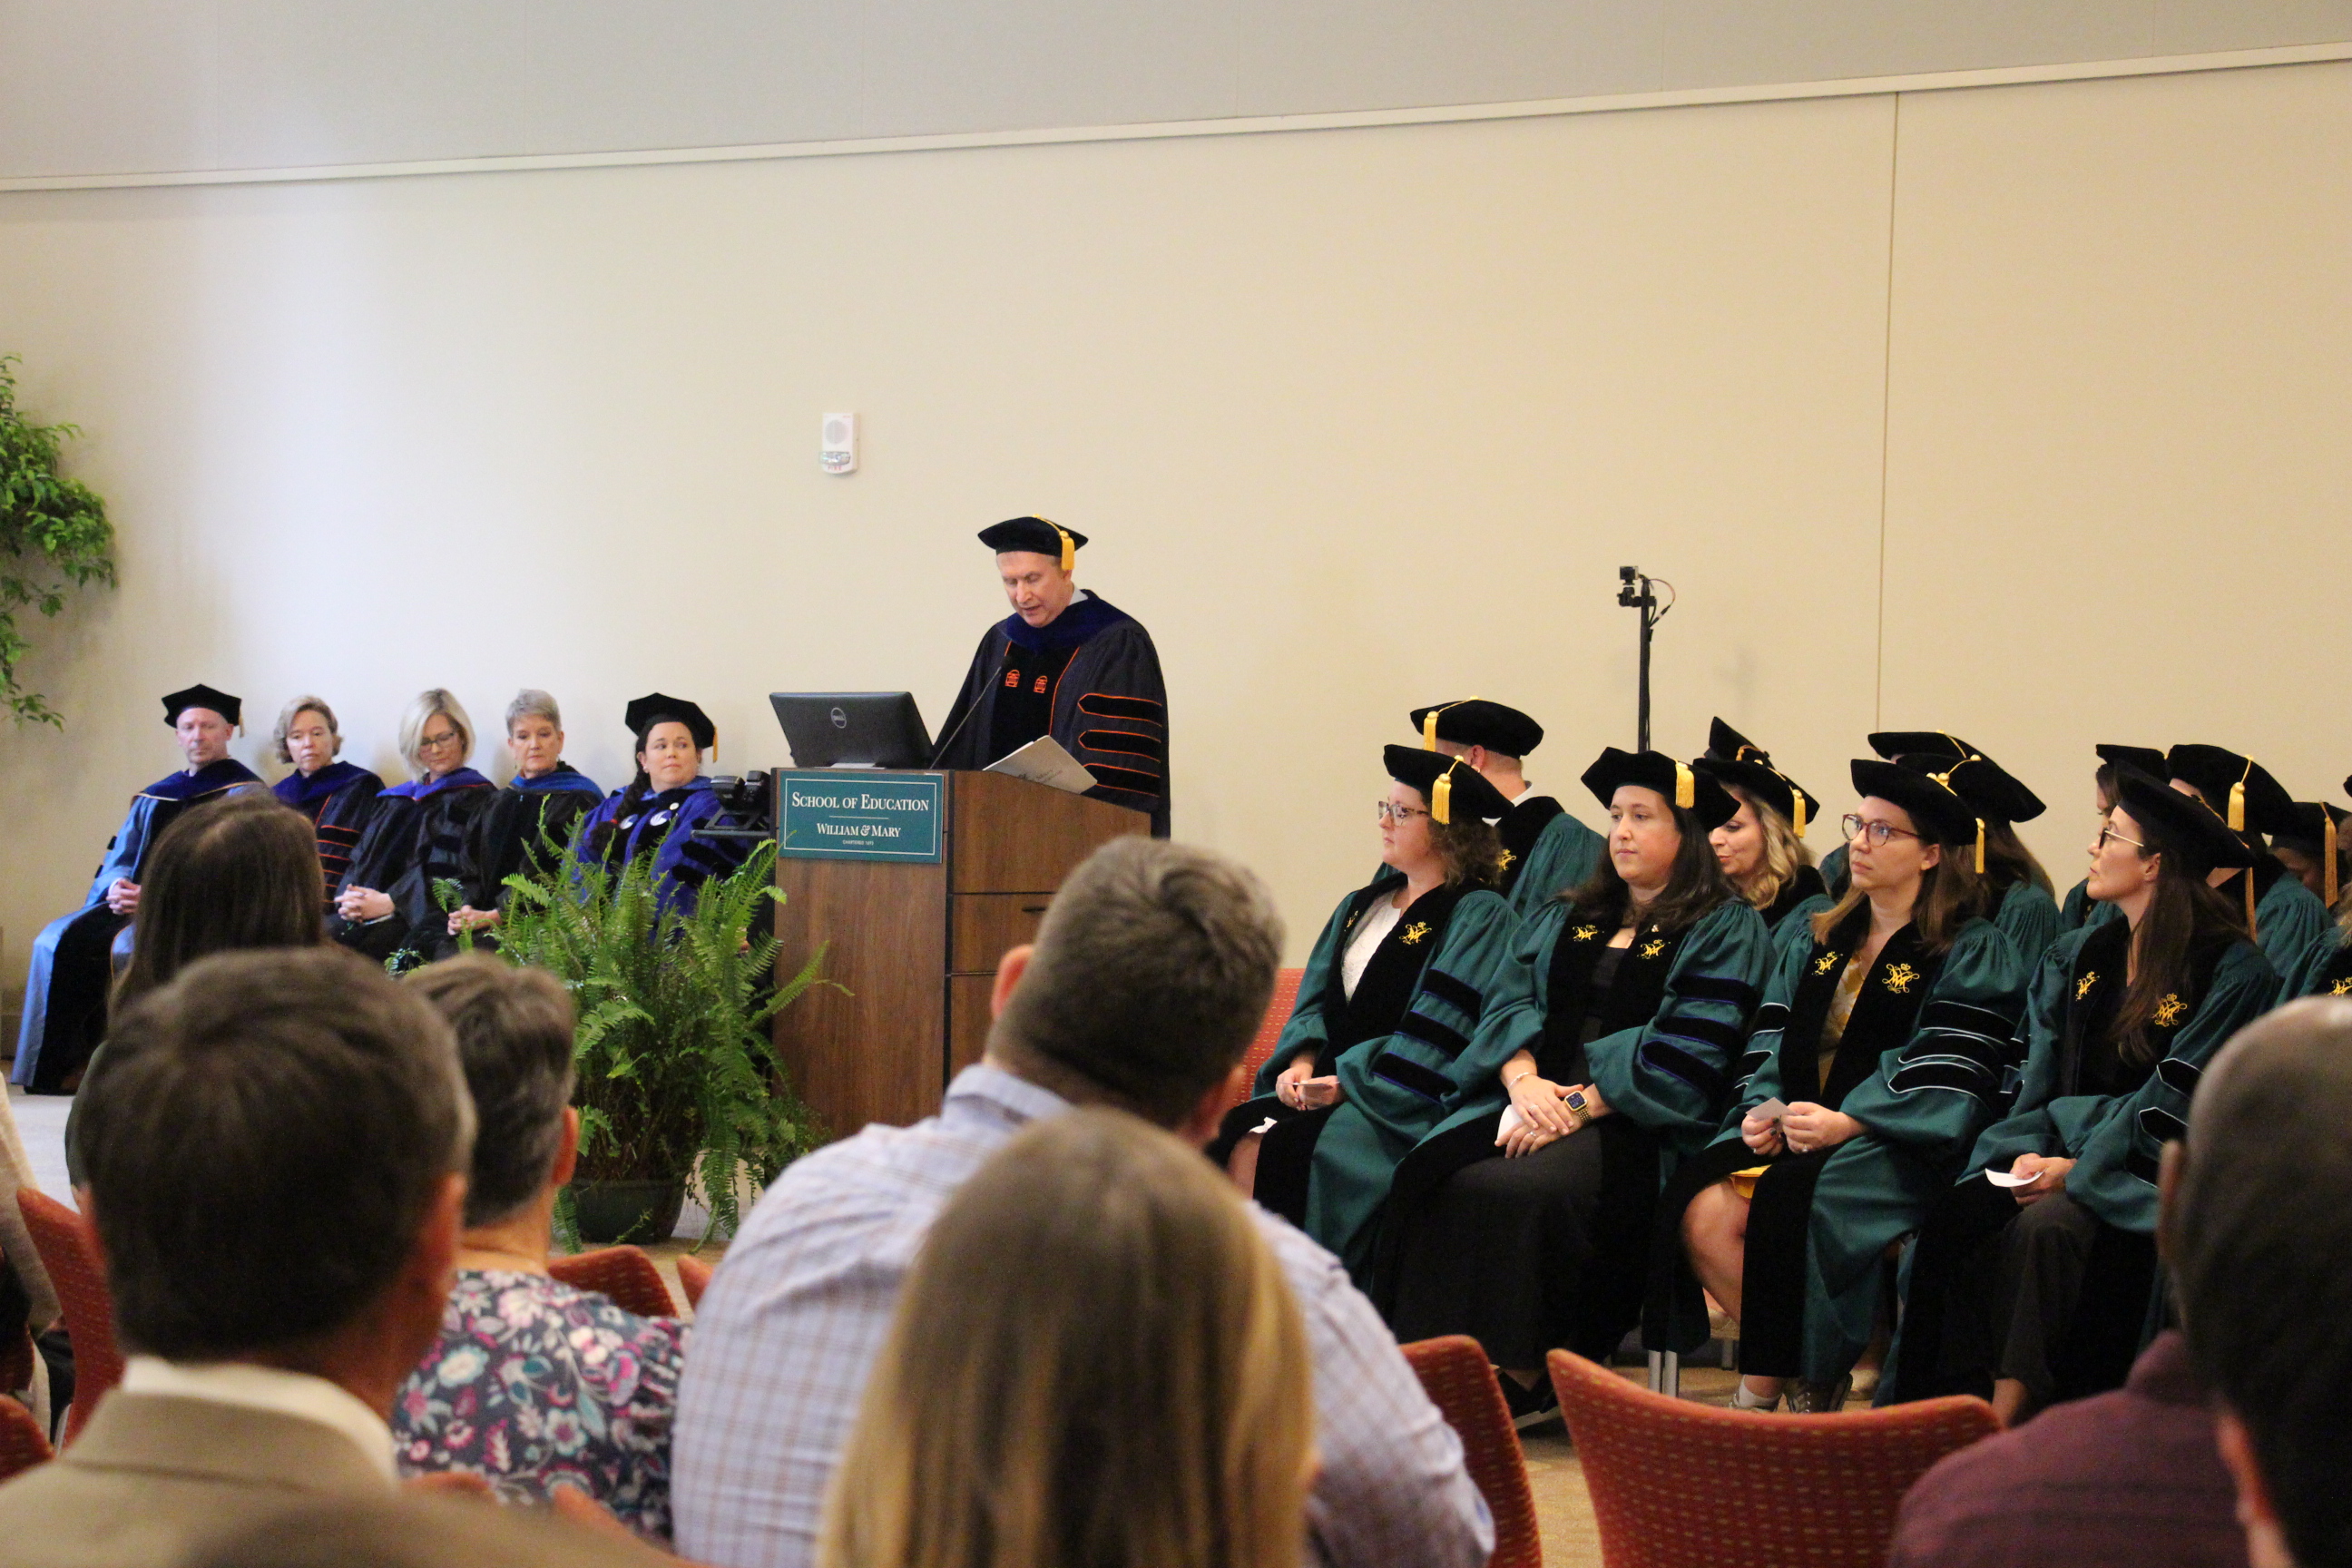 Dean Knoeppel Addresses Graduates and Audience